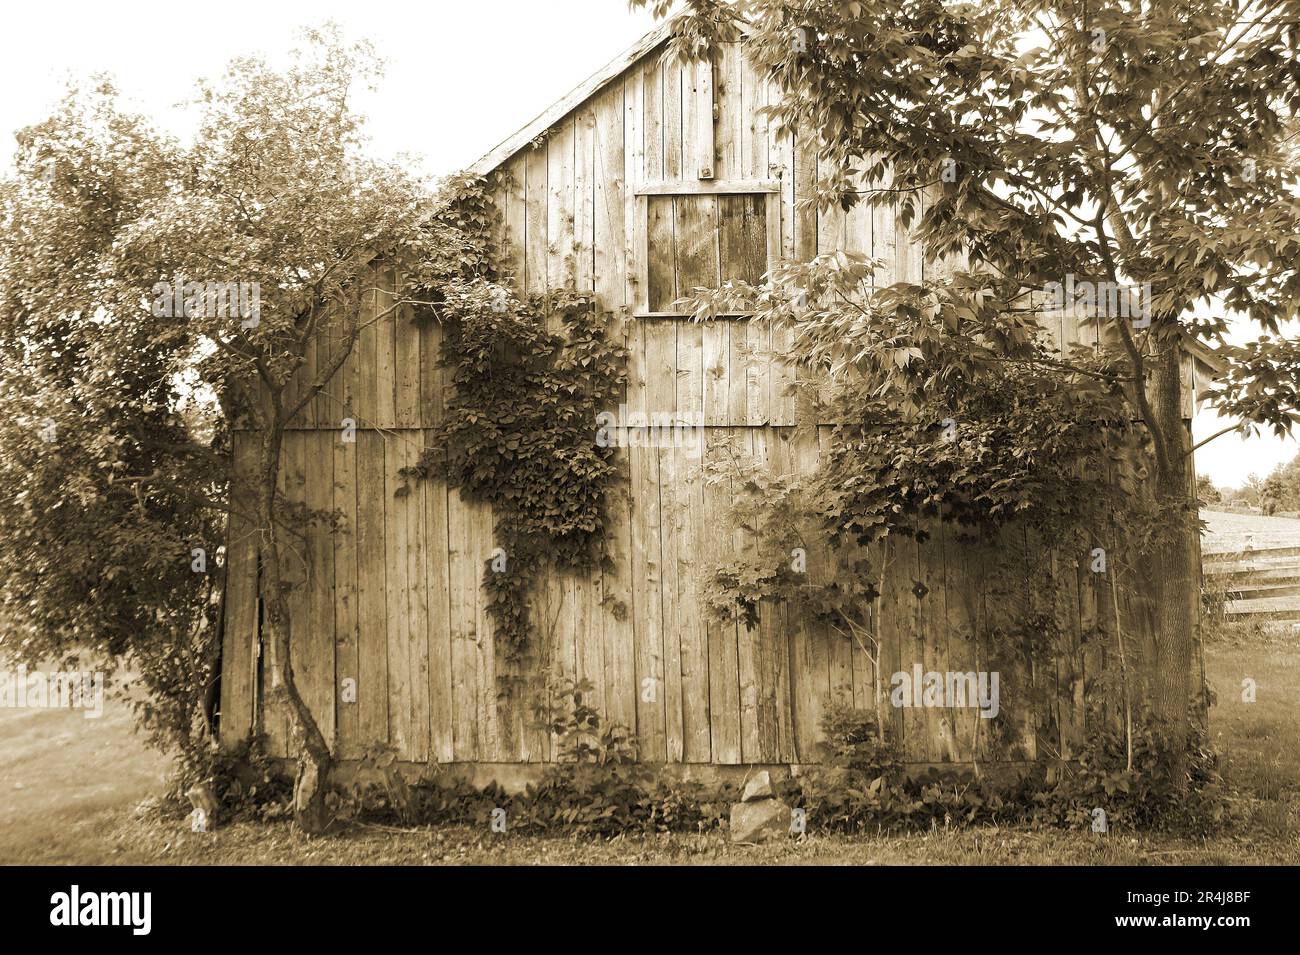 Old rustic farm barn in need of repair. Done in Sepia tone. Stock Photo